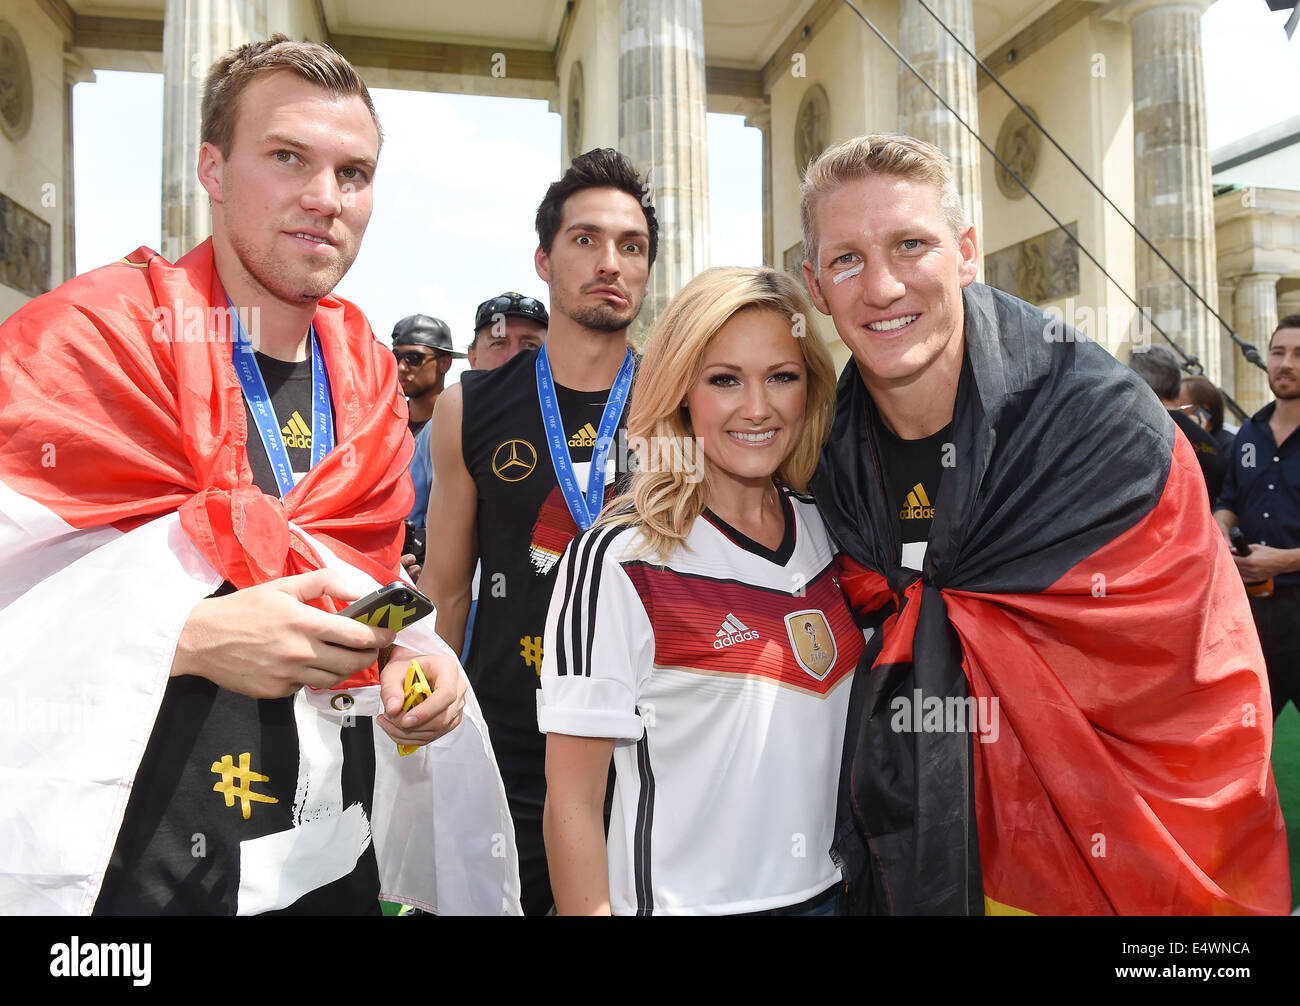 Singer Helene Fischer (2-R) and Germany's Kevin Grosskreutz (L-R), Mats Hummels and Bastian Schweinsteiger during the World Cup party after team German arrived back in German in front of the Brandenburg Gate in Berlin, Germany, 15 July 2014. The German team won the Brazil 2014 FIFA Soccer World Cup final against Argentina by 1-0 on 13 July 2014, winning the world cup title for the fourth time after 1954, 1974 and 1990. Photo: Markus Gilliar/GES/DFB/dpa (ATTENTION: Editorial use only and mandatory credit 'Photo: Markus Gilliar/GES/DFB/dpa') Stock Photo